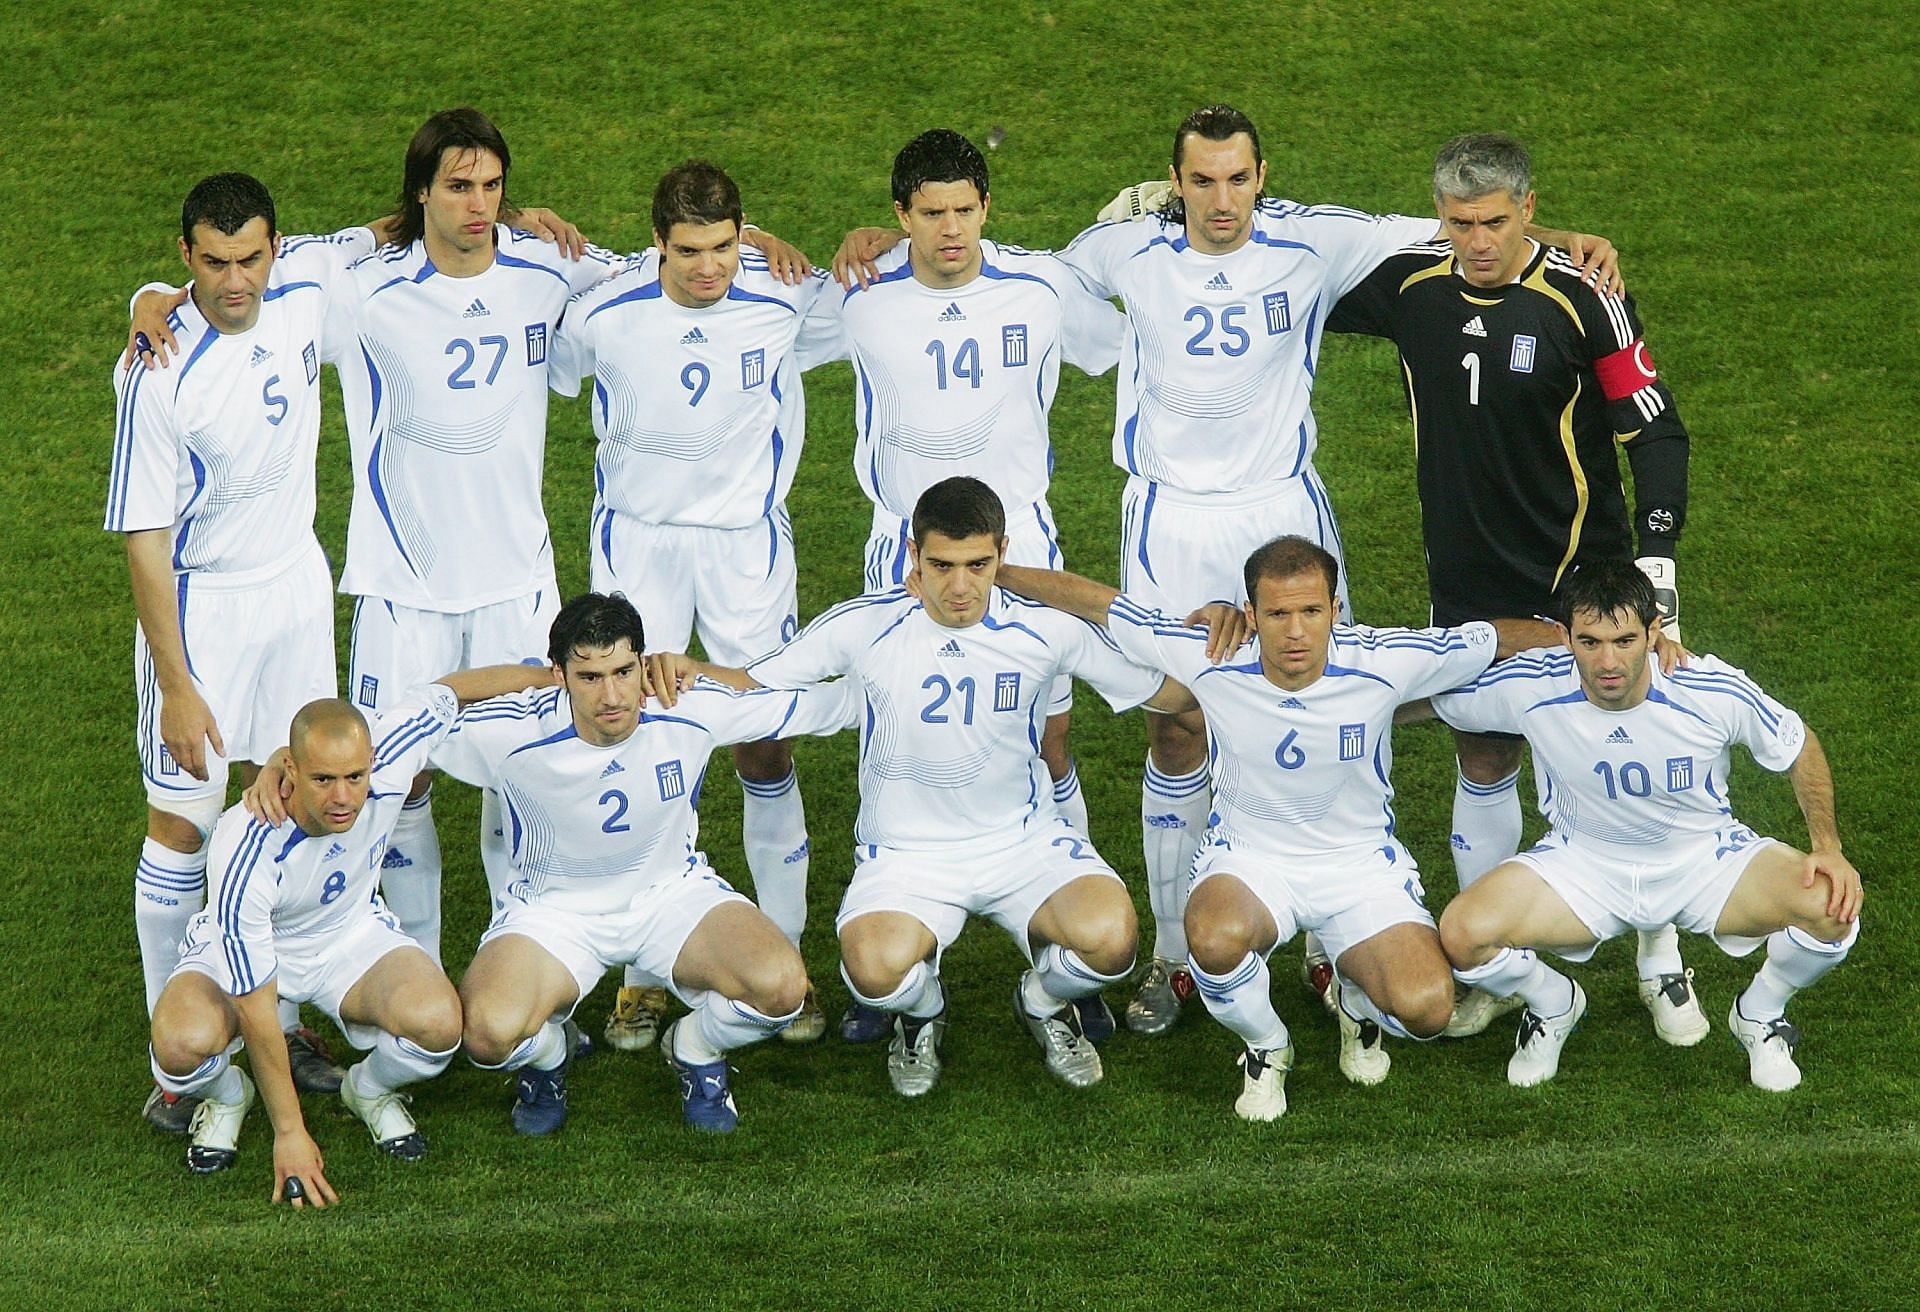 Greece failed to qualify for the 2006 FIFA World Cup after a stellar Euro campaign